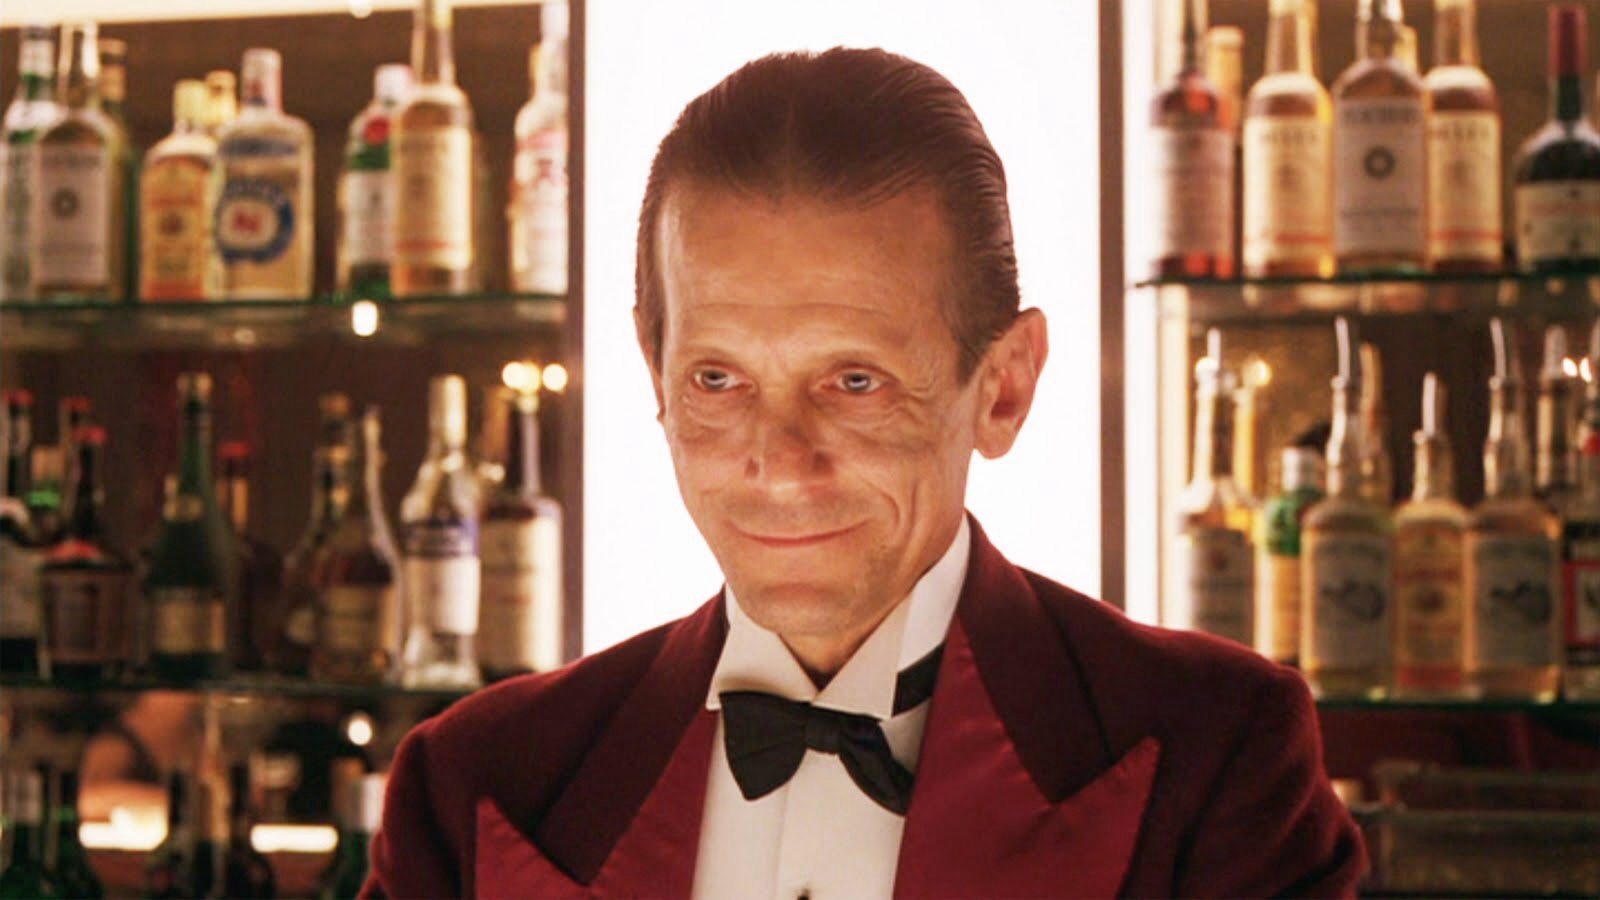 The bartender from "The Shining." Honestly, he wasn't a bad bartender, just really creepy.